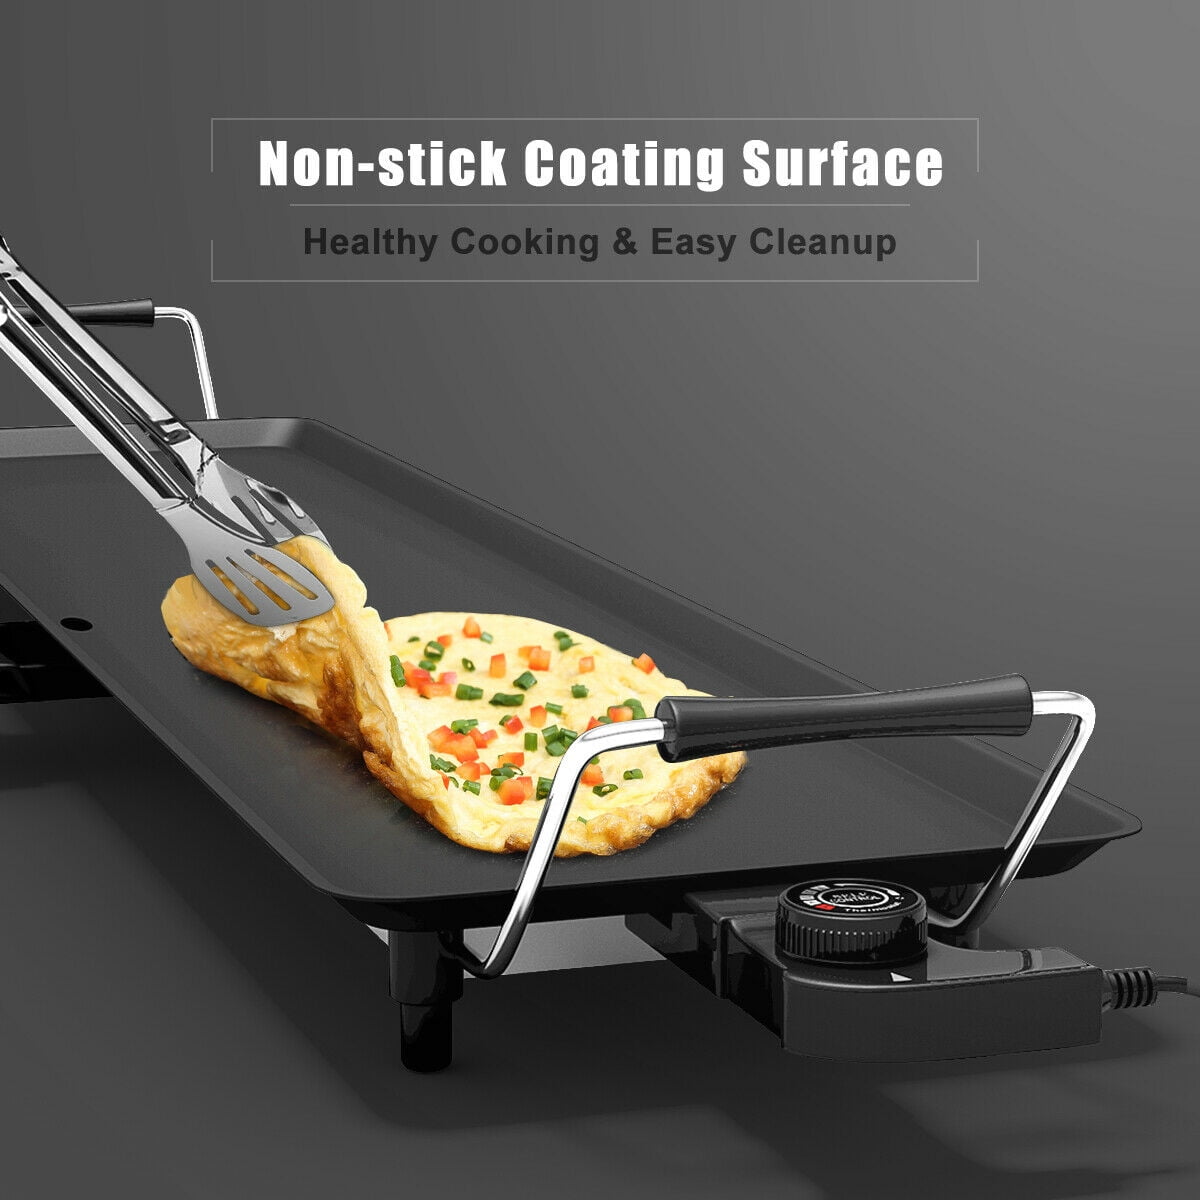 CASART Electric Teppanyaki Grill Table Hot BBQ Plate for Kitchen Dinner Party Camping Festival Cooking 3 Sizes Available L XL XXL Large 